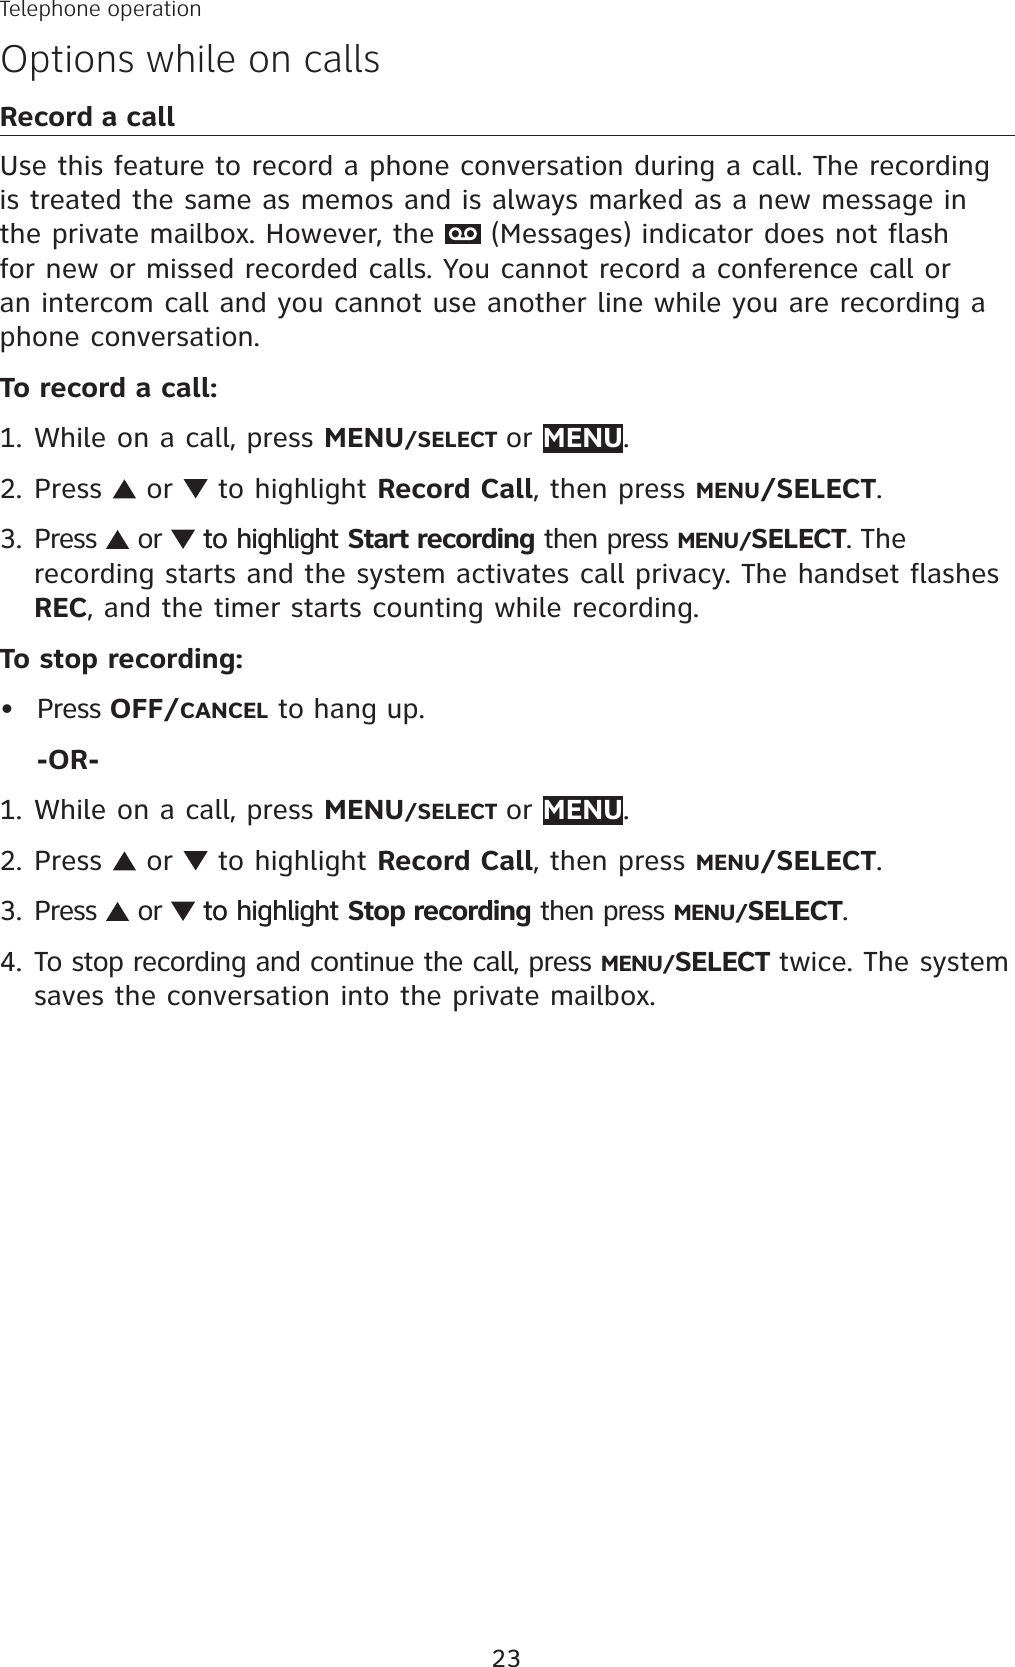 23Telephone operationOptions while on callsRecord a callUse this feature to record a phone conversation during a call. The recording is treated the same as memos and is always marked as a new message in the private mailbox. However, the   (Messages) indicator does not flash for new or missed recorded calls. You cannot record a conference call or an intercom call and you cannot use another line while you are recording a phone conversation.To record a call:While on a call, press MENU/SELECT or MENU.Press   or   to highlight Record Call, then press MENU/SELECT.Press   or  to highlightto highlight Start recording then press MENU/SELECT. Therecording starts and the system activates call privacy. The handset flashesREC, and the timer starts counting while recording.To stop recording:Press OFF/CANCEL to hang up.-OR-While on a call, press MENU/SELECT or MENU.Press   or   to highlight Record Call, then press MENU/SELECT.Press   or  to highlightto highlight Stop recording then press MENU/SELECT.To stop recording and continue the call, press MENU/SELECT twice. The system saves the conversation into the private mailbox. 1.2.3.•1.2.3.4.